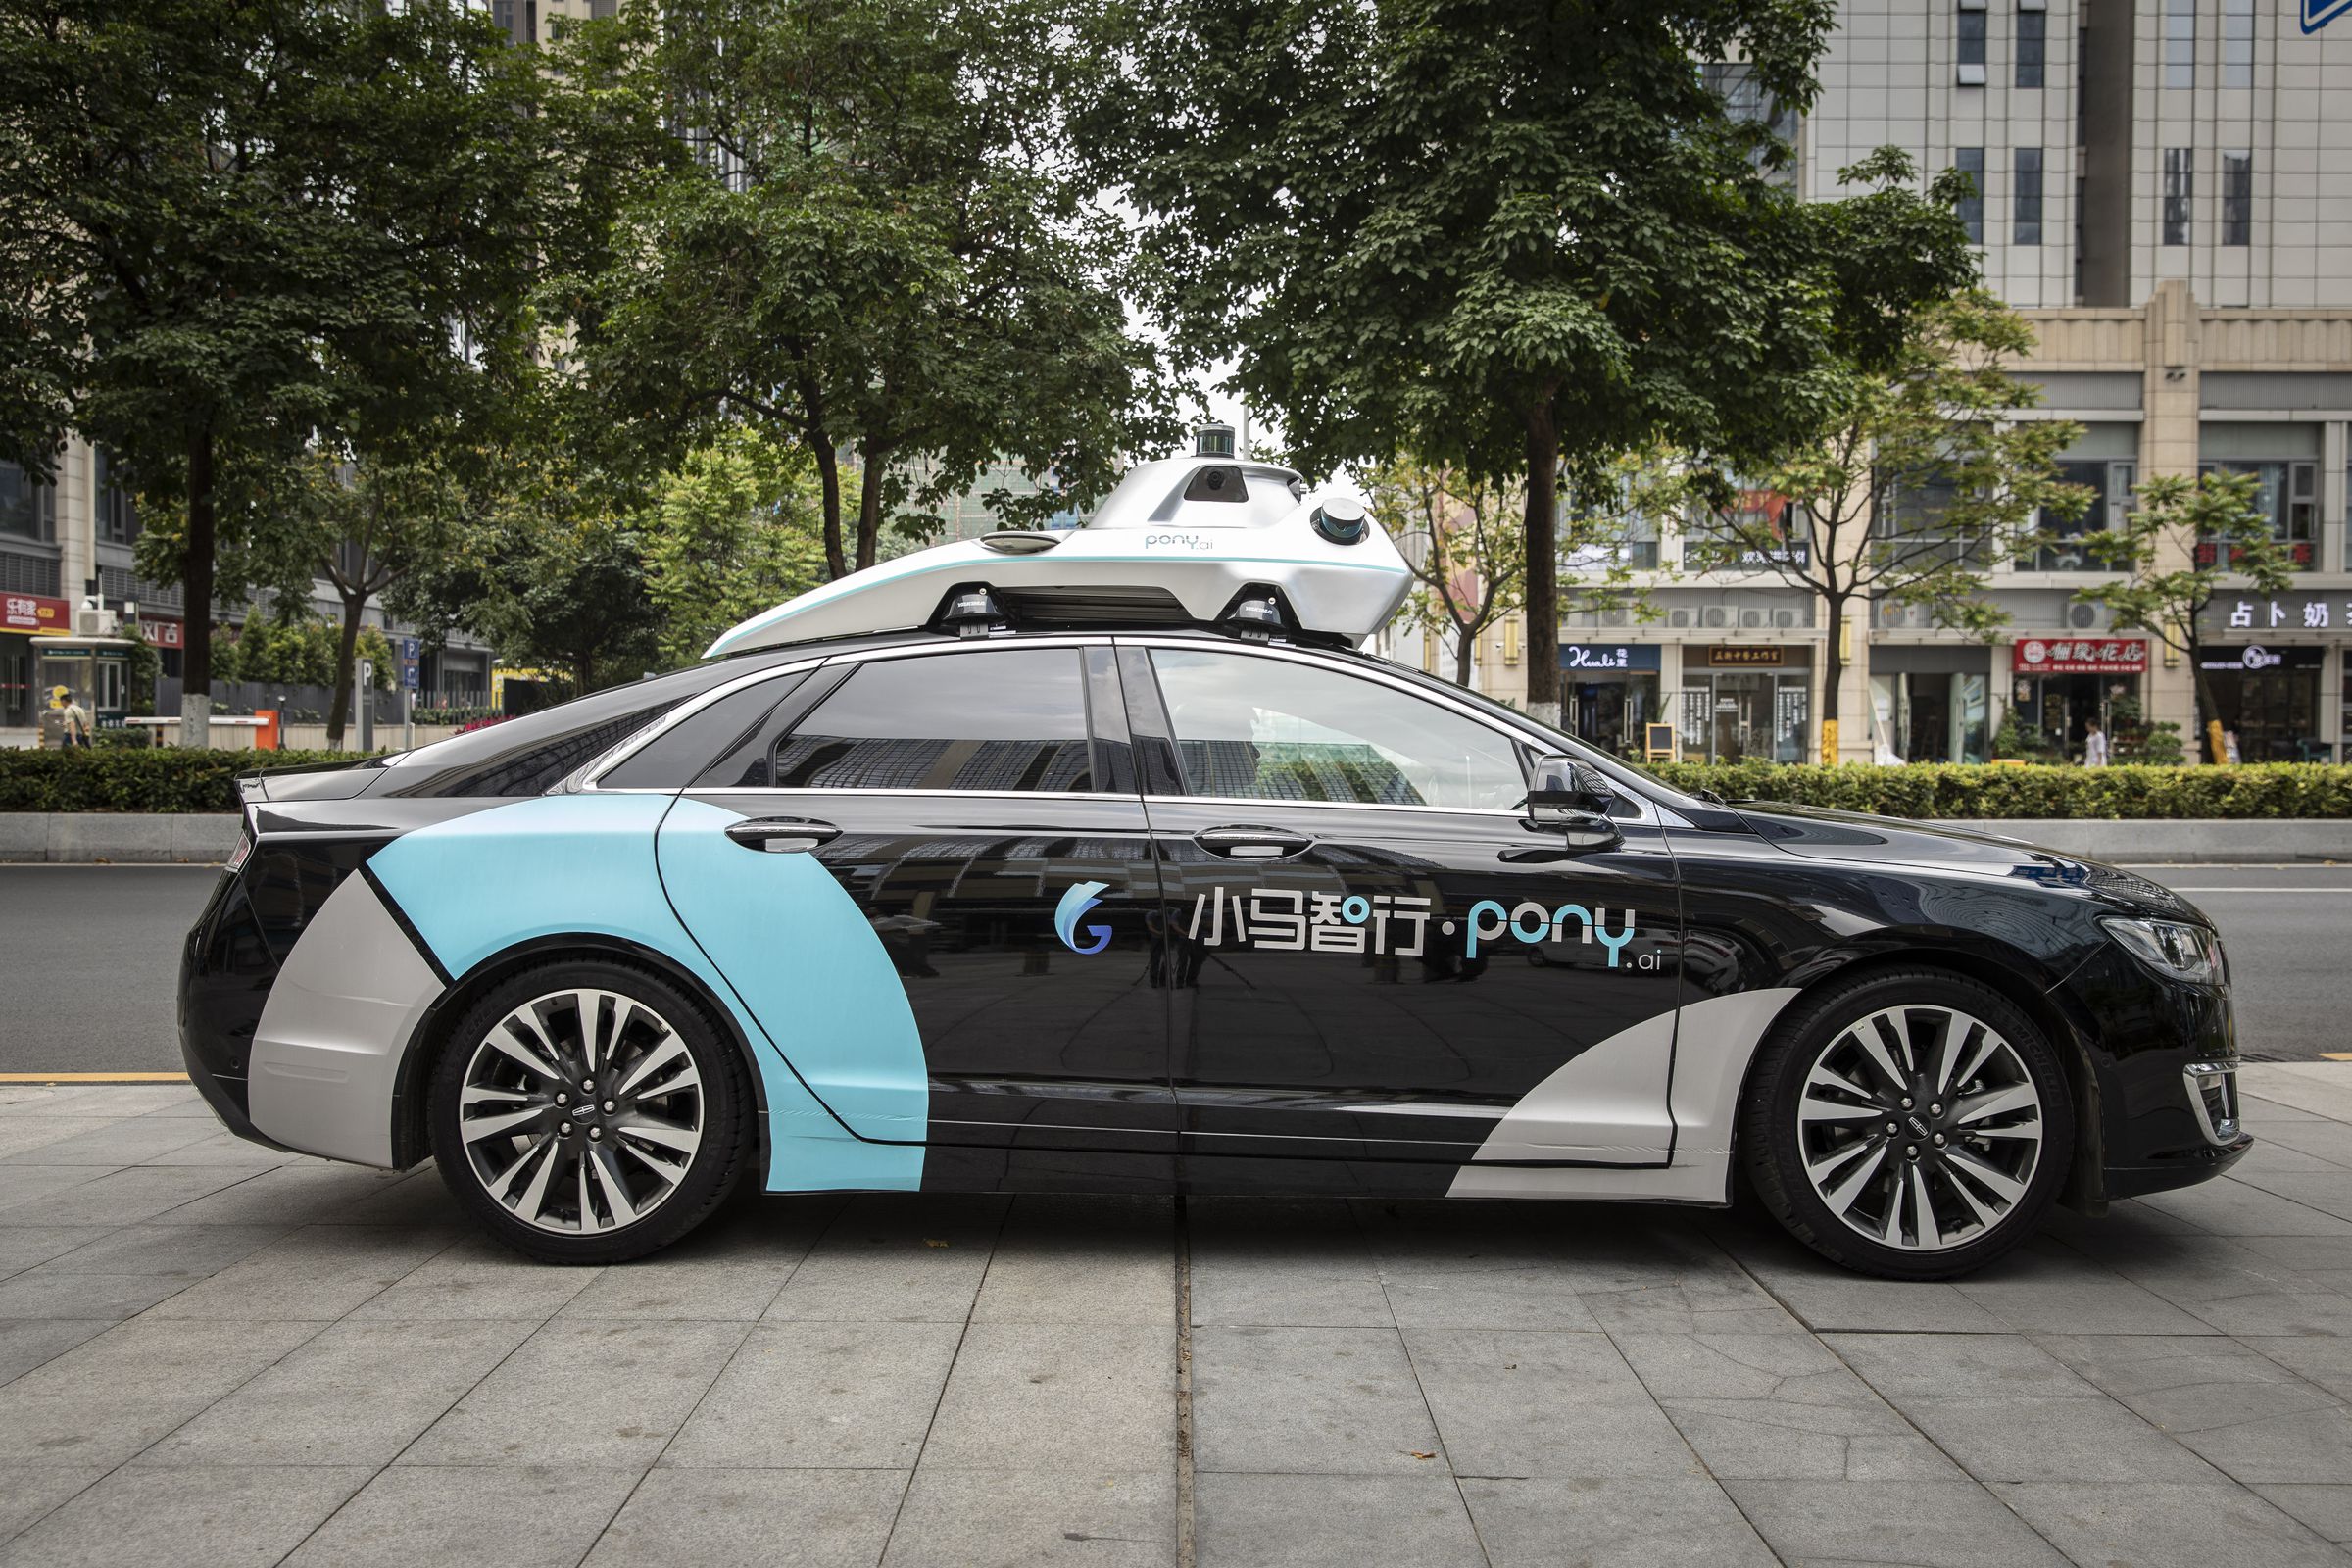 China’s Robocars Are Way Behind Their U.S. Counterparts